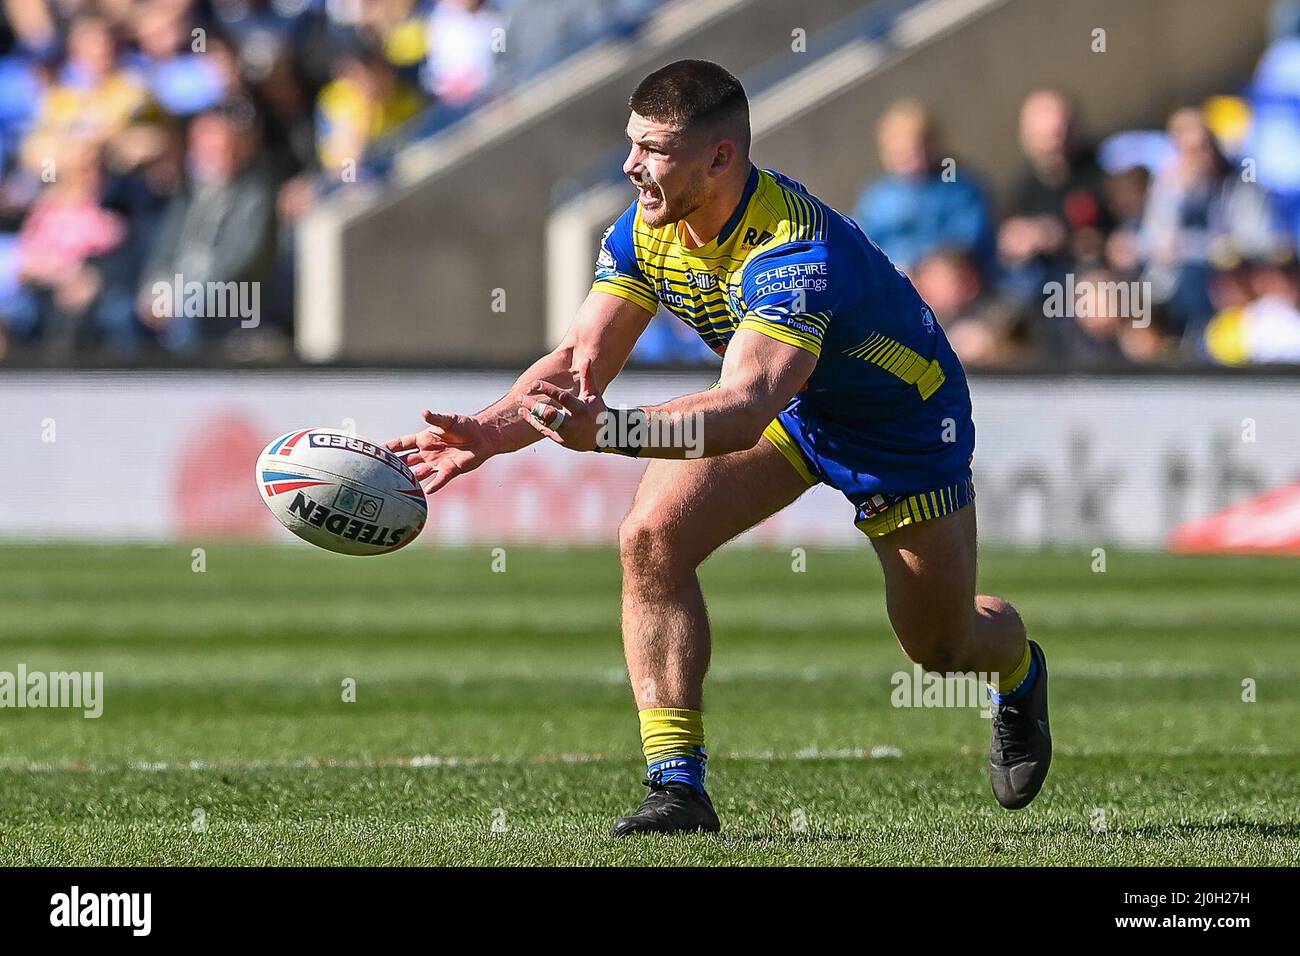 Danny Walker #16 of Warrington Wolves in action in, on 3/19/2022. (Photo by Craig Thomas/News Images/Sipa USA) Credit: Sipa USA/Alamy Live News Stock Photo